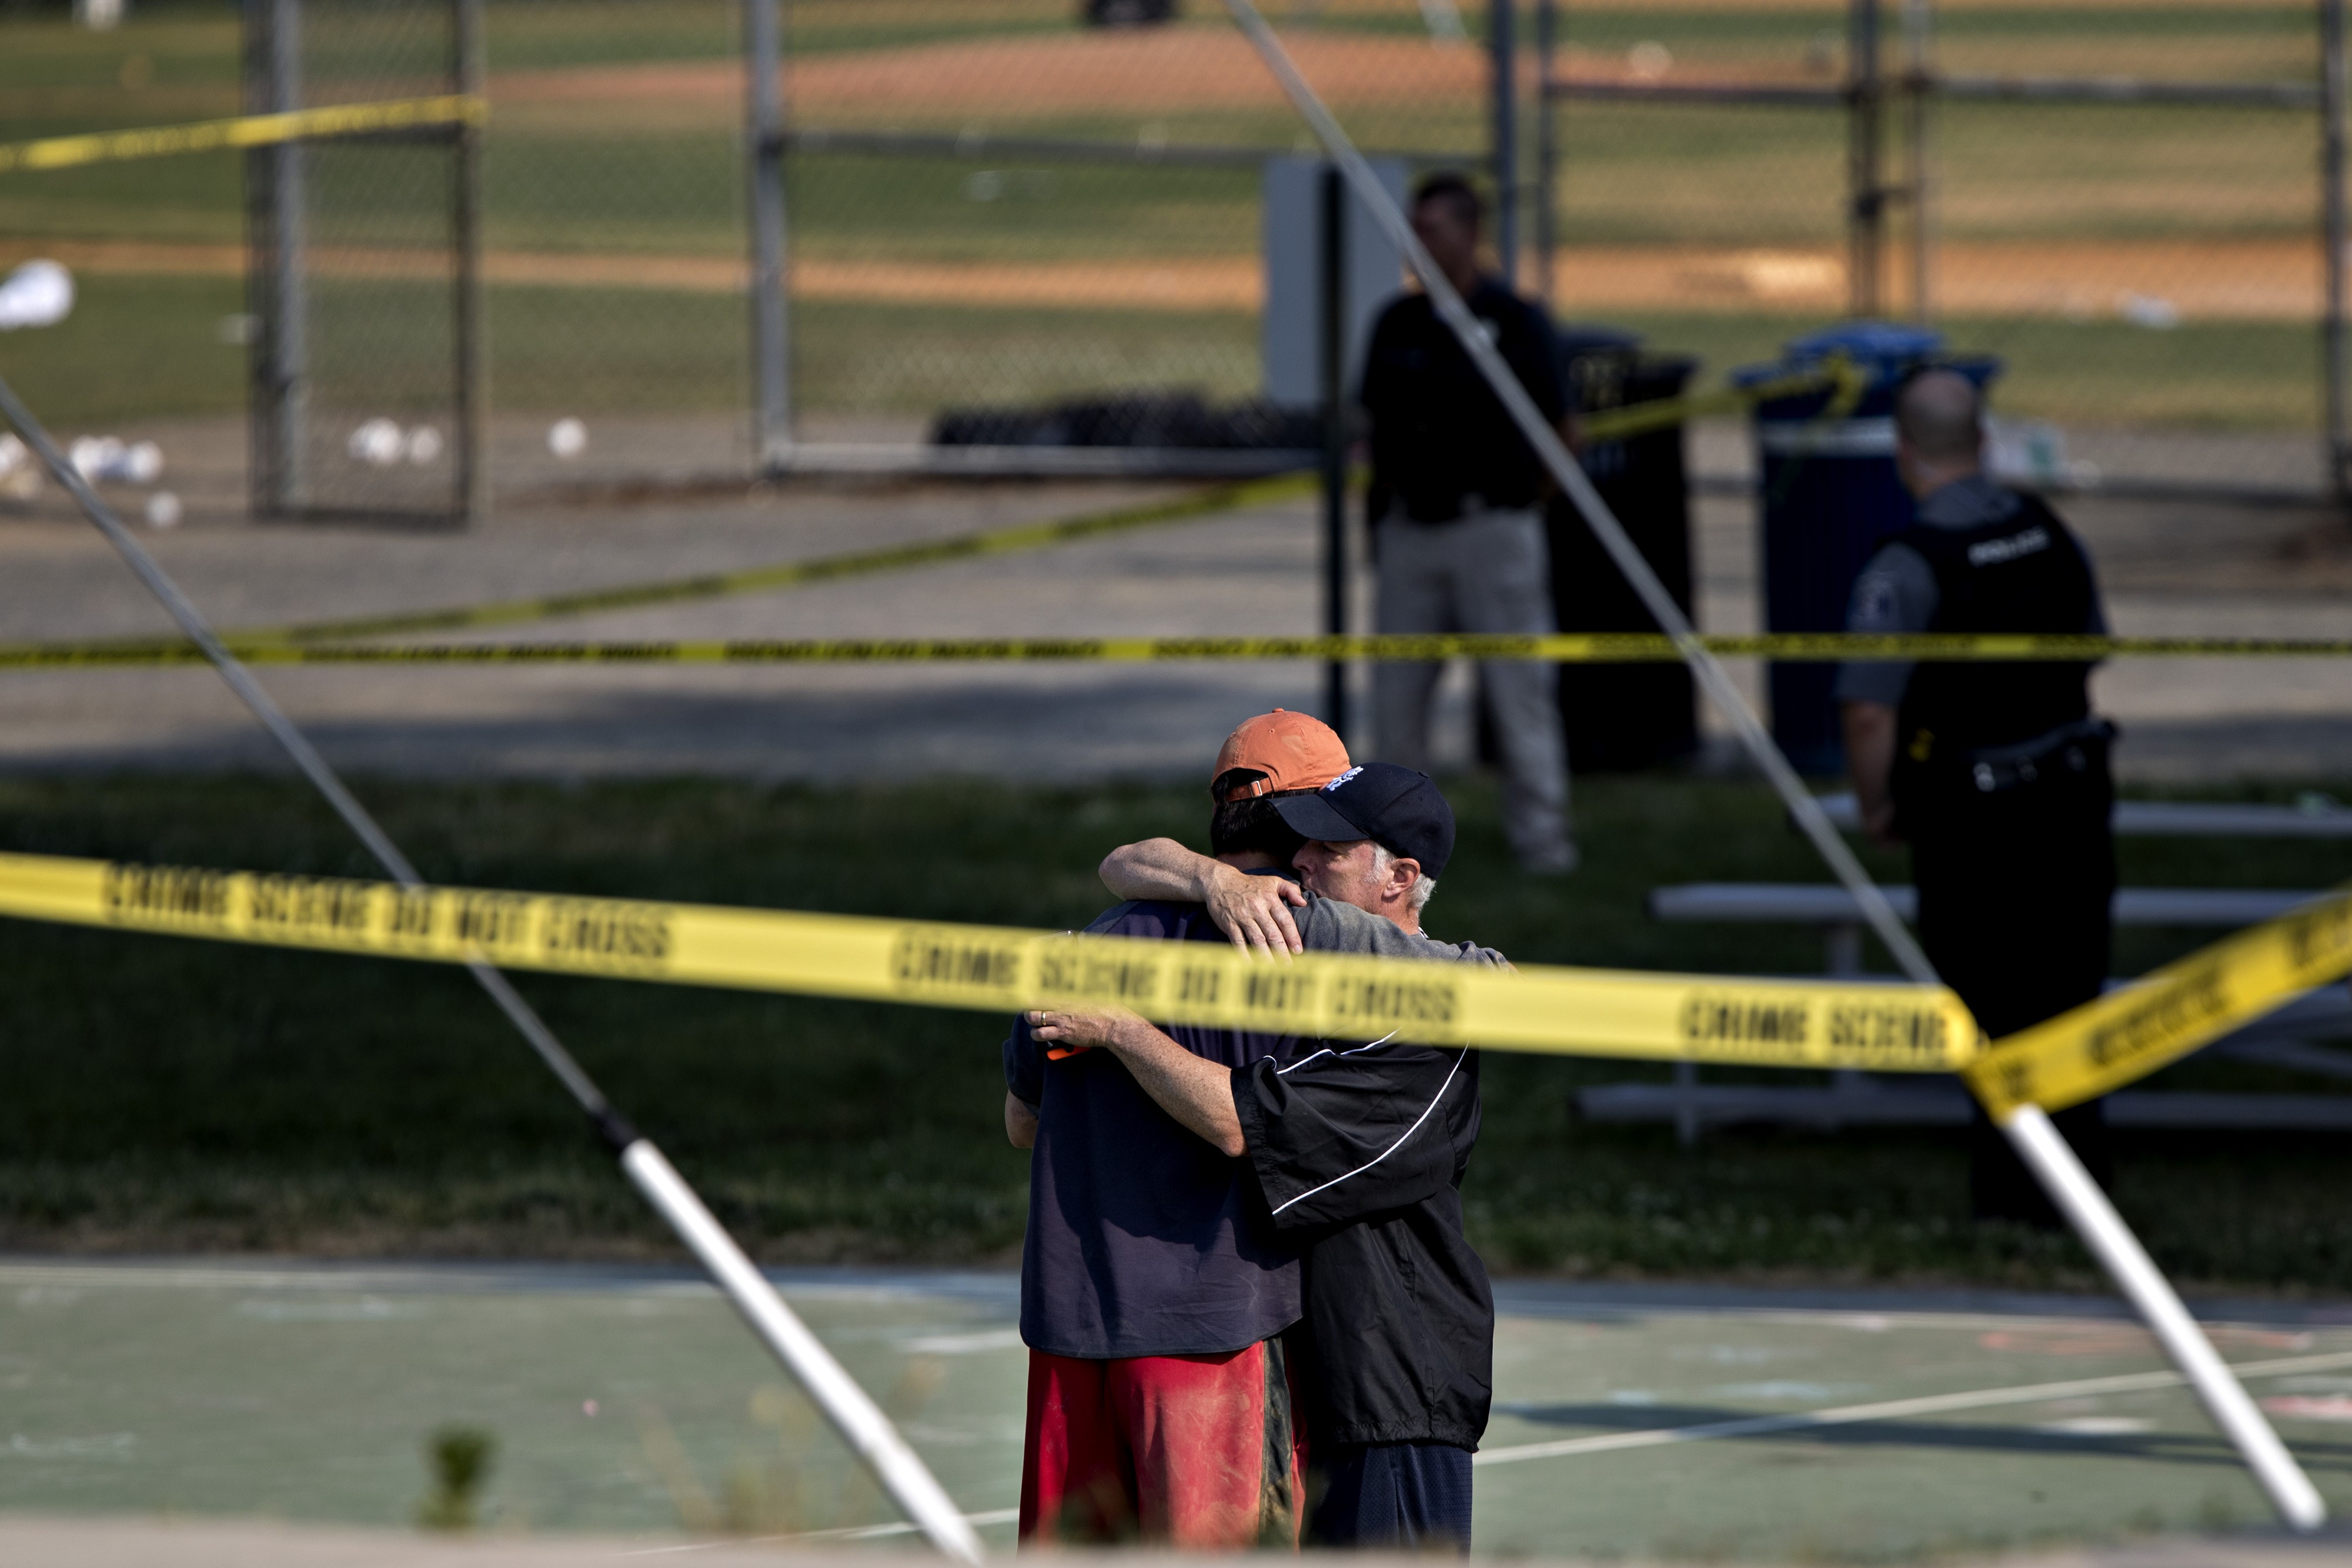 Two people hug in front of police crime scene tape following the shootings during a congressional baseball practice at the Eugene Simpson Stadium Park in Alexandria, Virginia, on June 14. Photo: Bloomberg